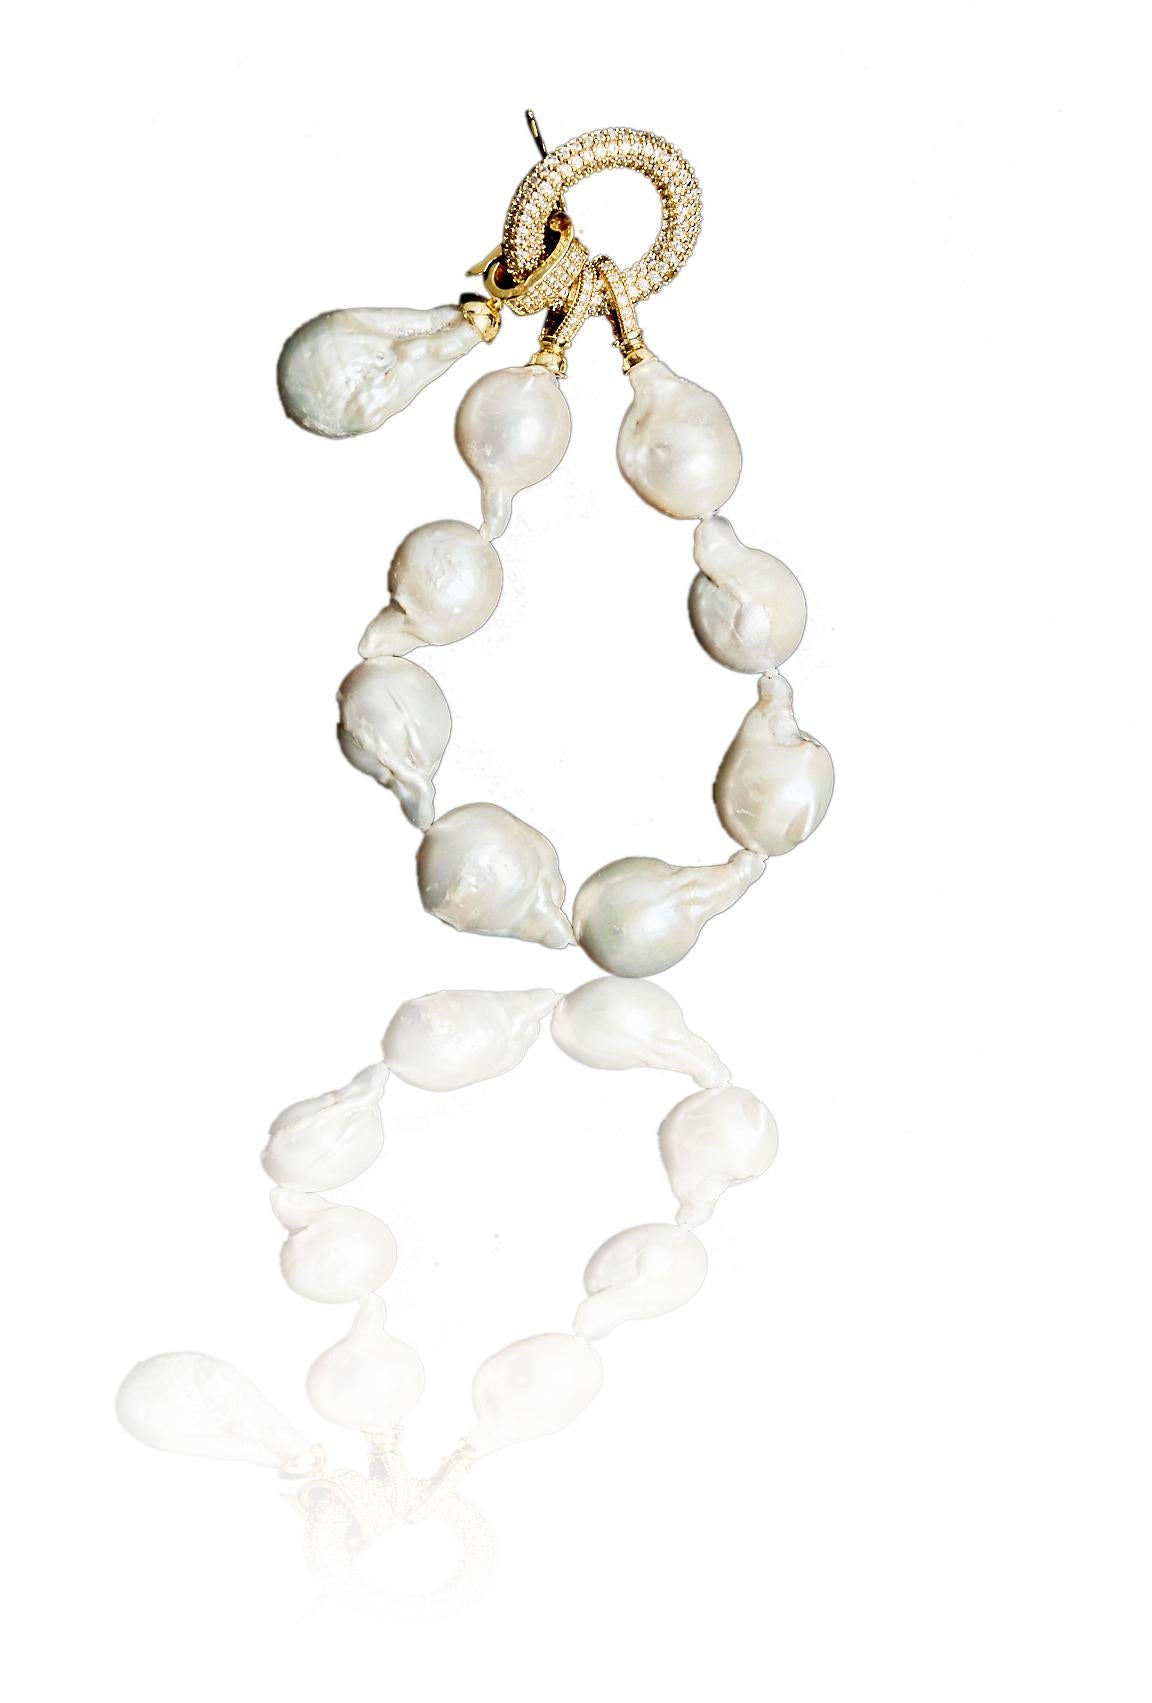 Pearl bracelet with genuine baroque pearls with an adorned lock shining with crystals and a removable oversized genuine baroque pearl charm.